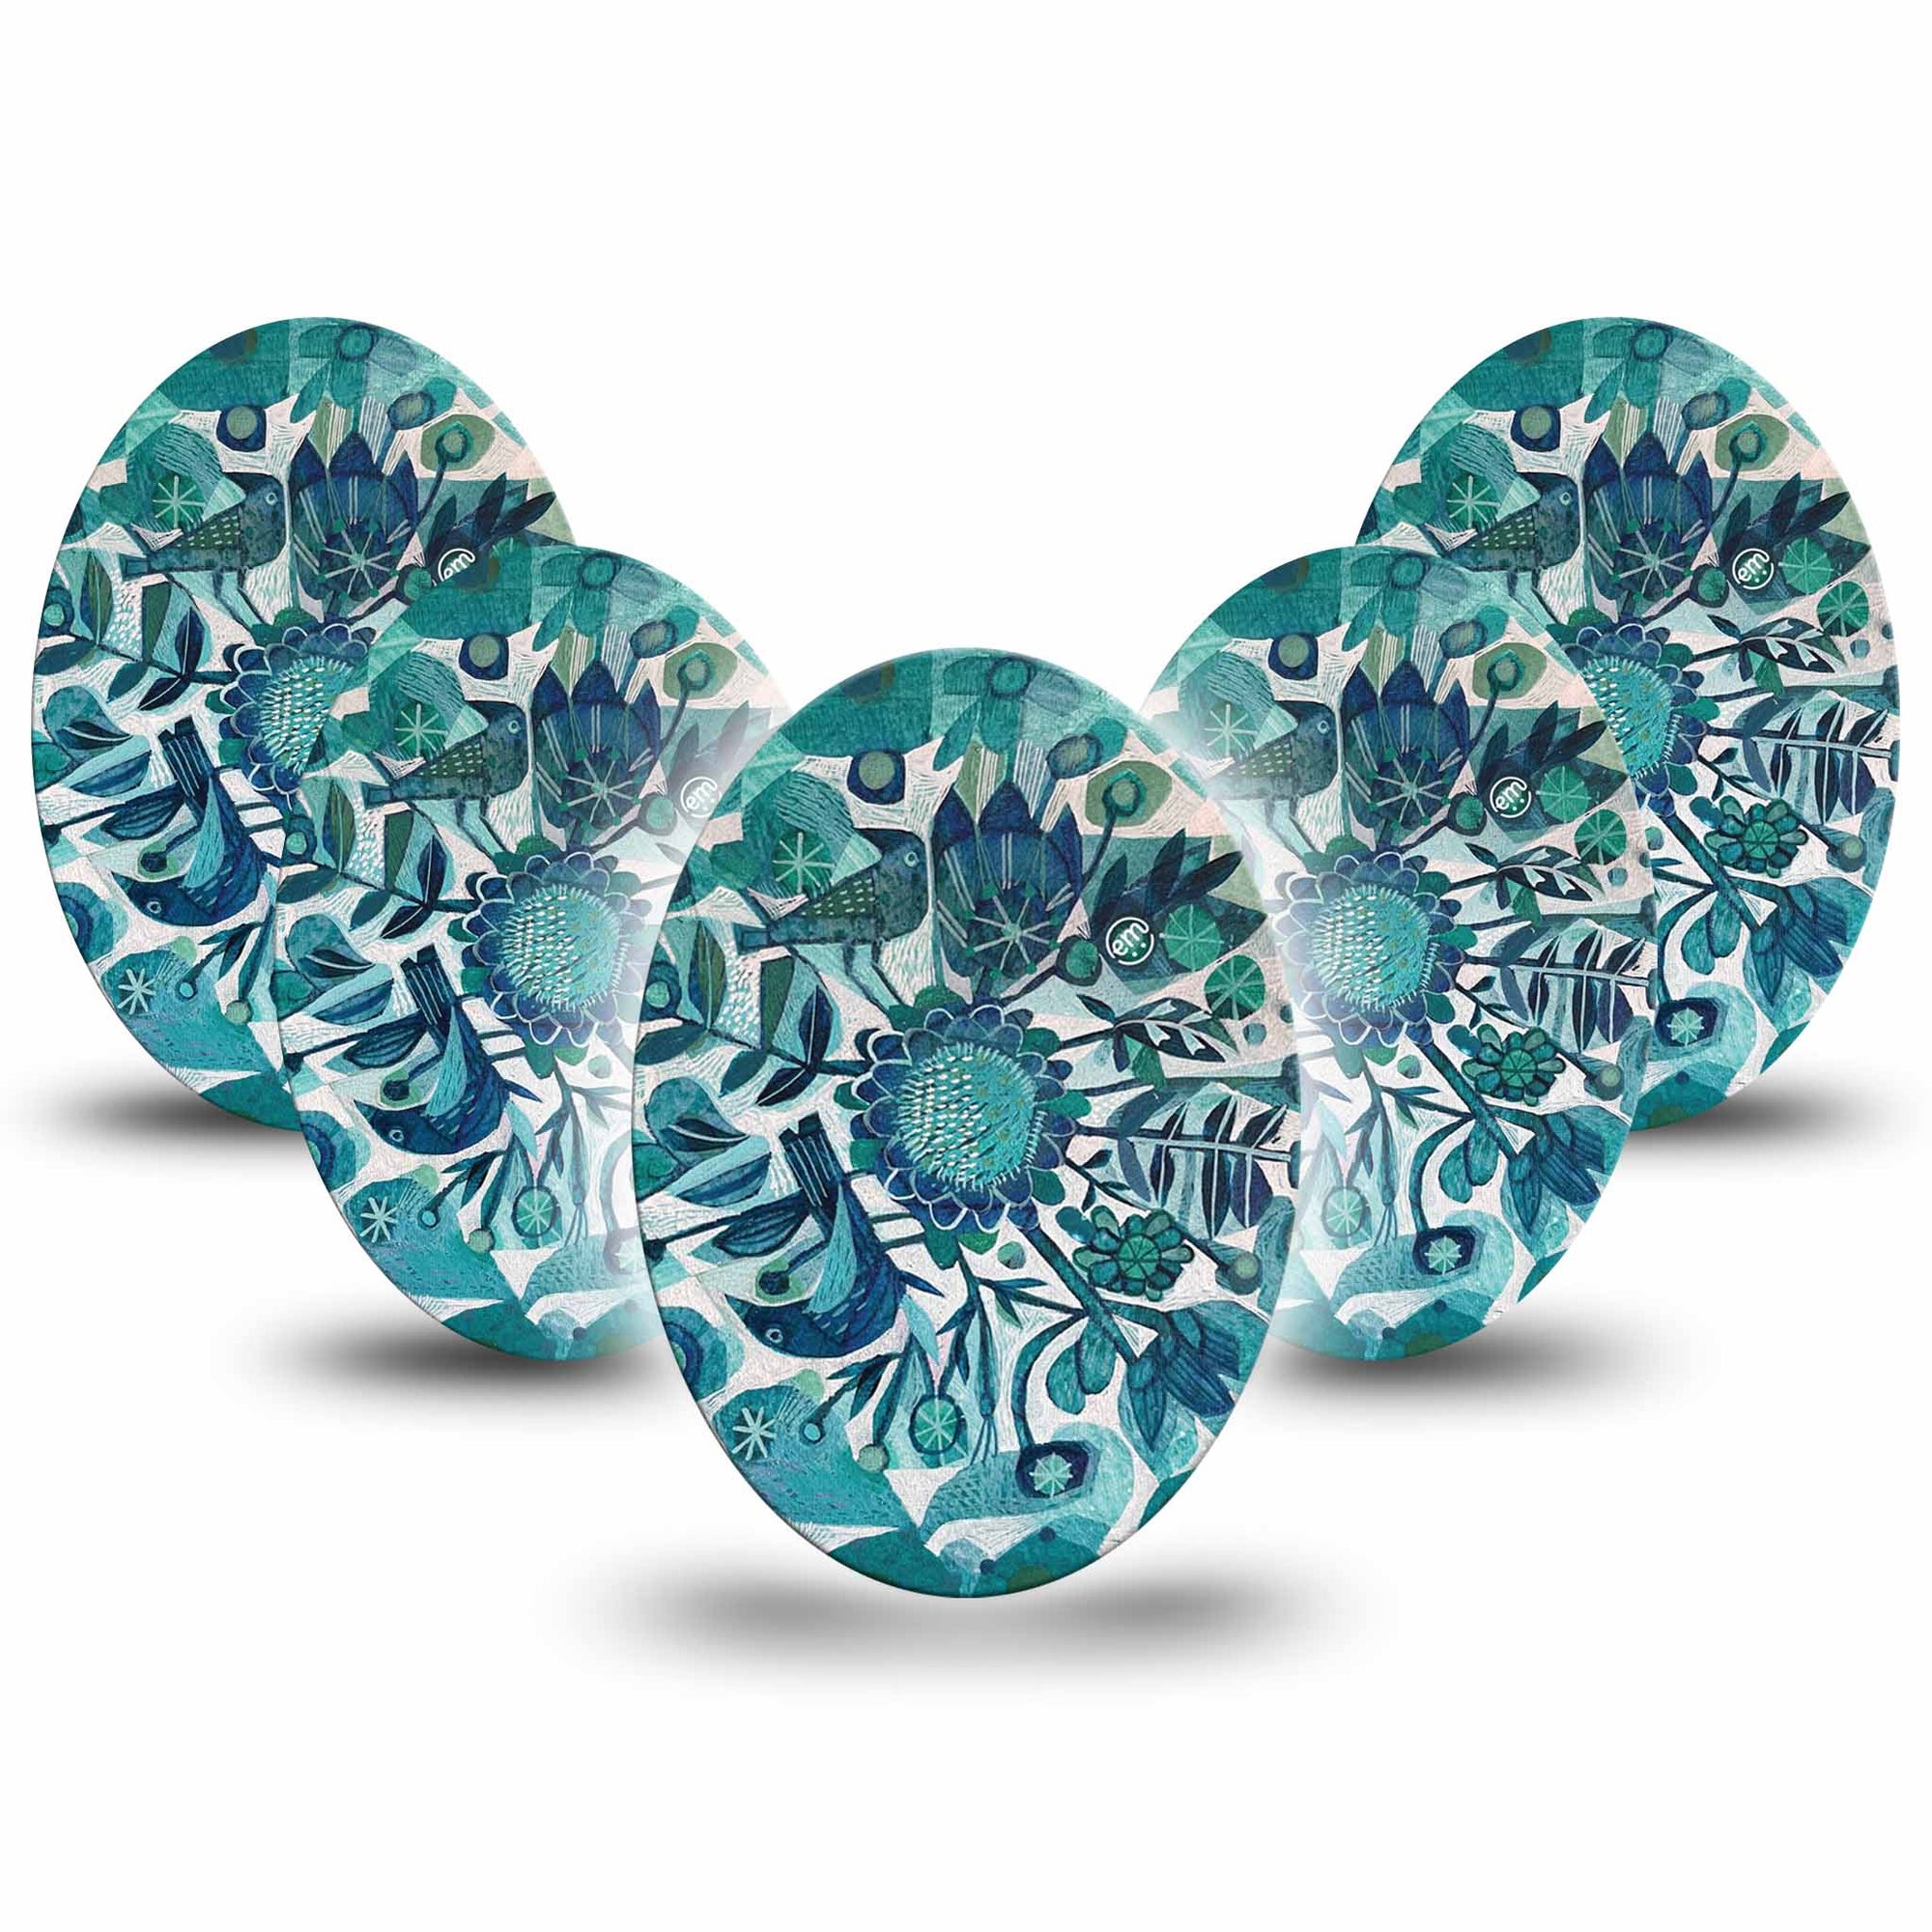 Medtronic Enlite / Guardian Sprouting Hope Universal Oval Patch, 5-Pack, Blue Green Floral CGM Adhesive Tape